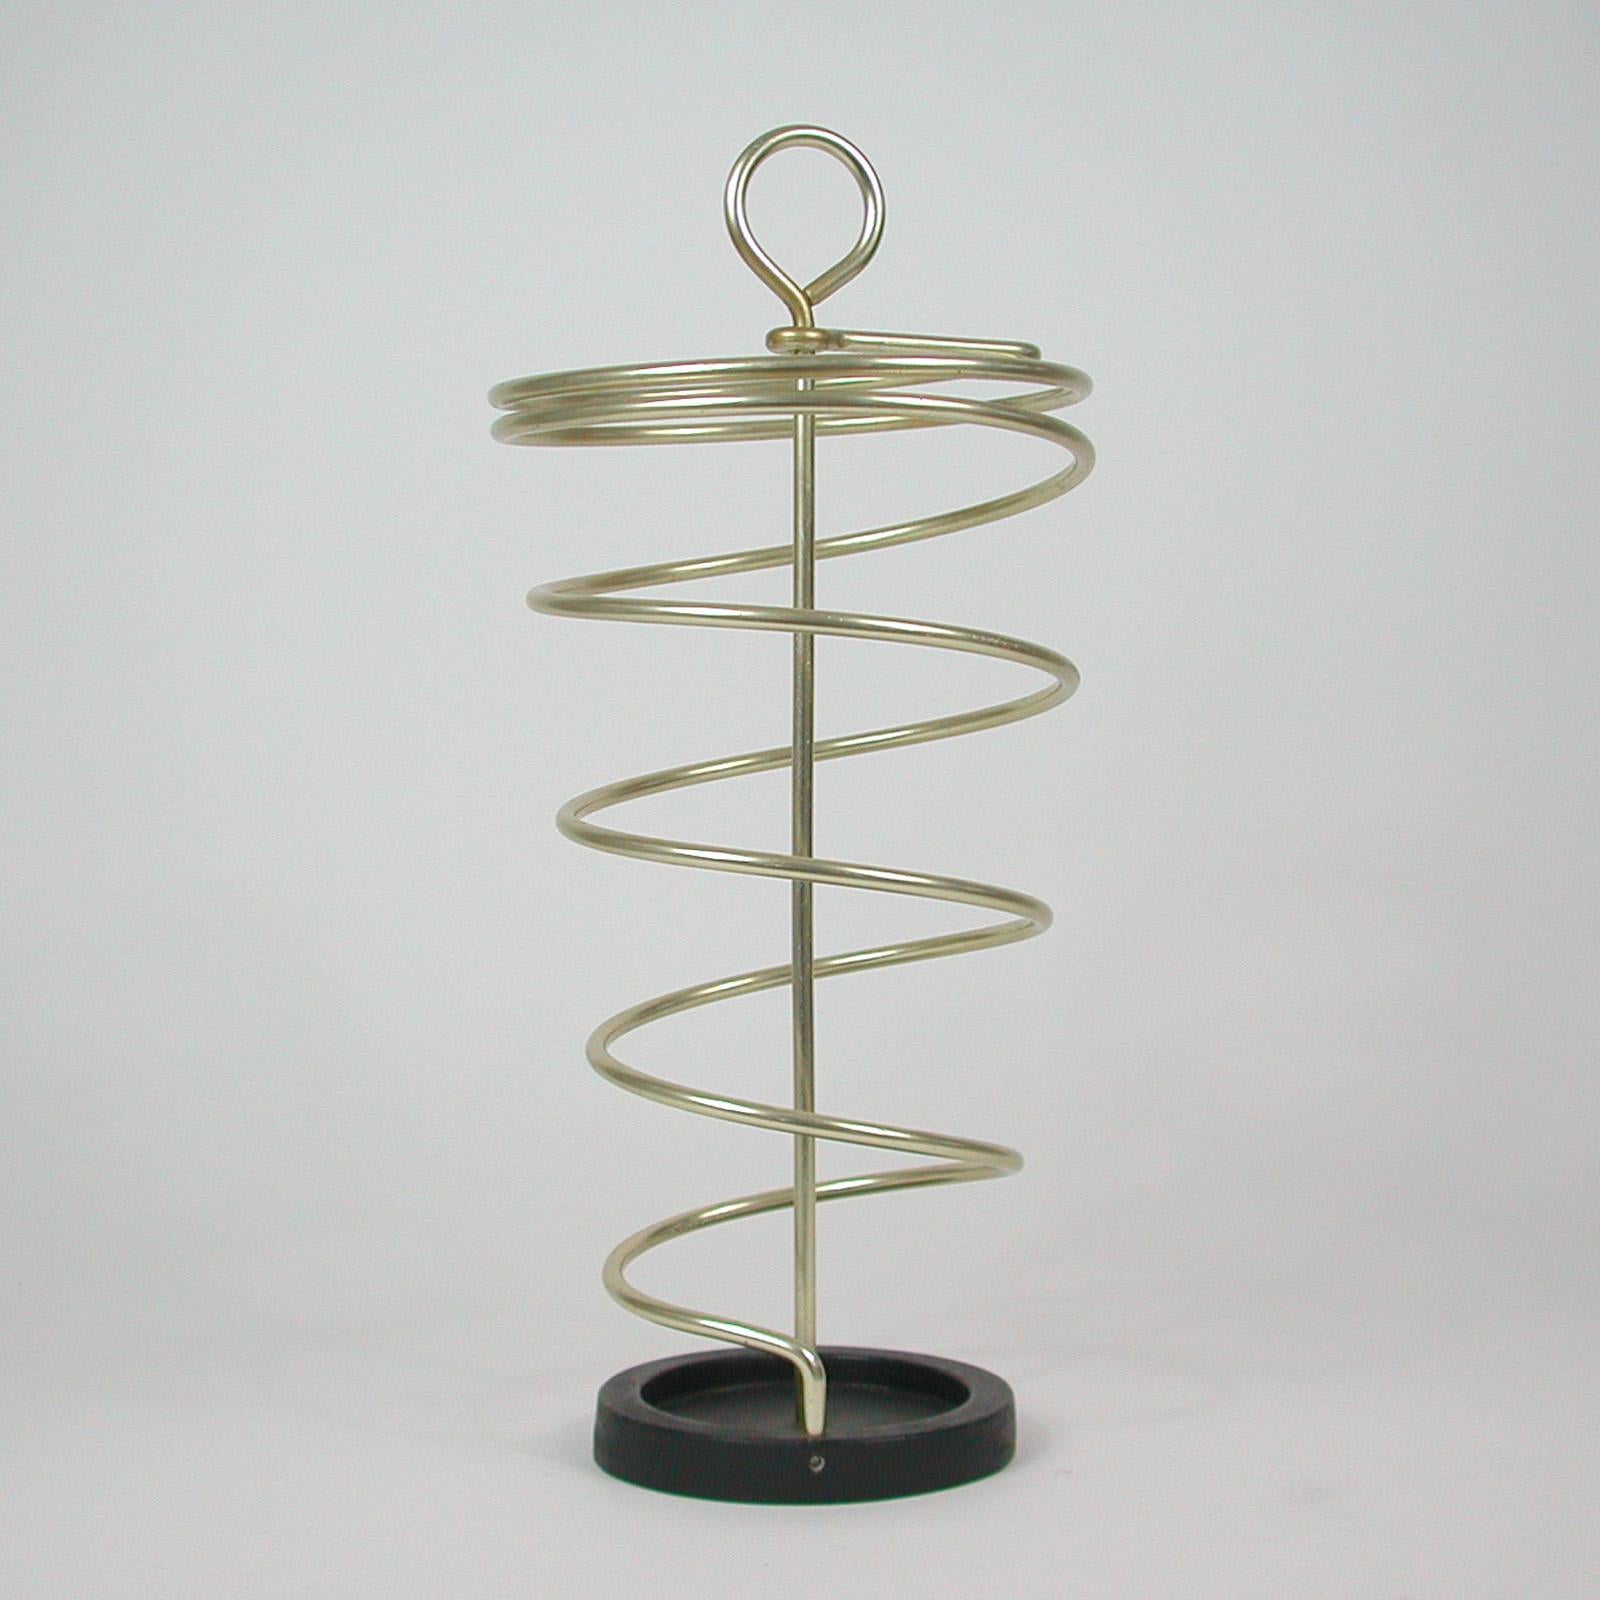 This midcentury atomic umbrella stand was designed and manufactured in Austria in the 1950s.
It features a gold anodized aluminum frame and black cast iron base.